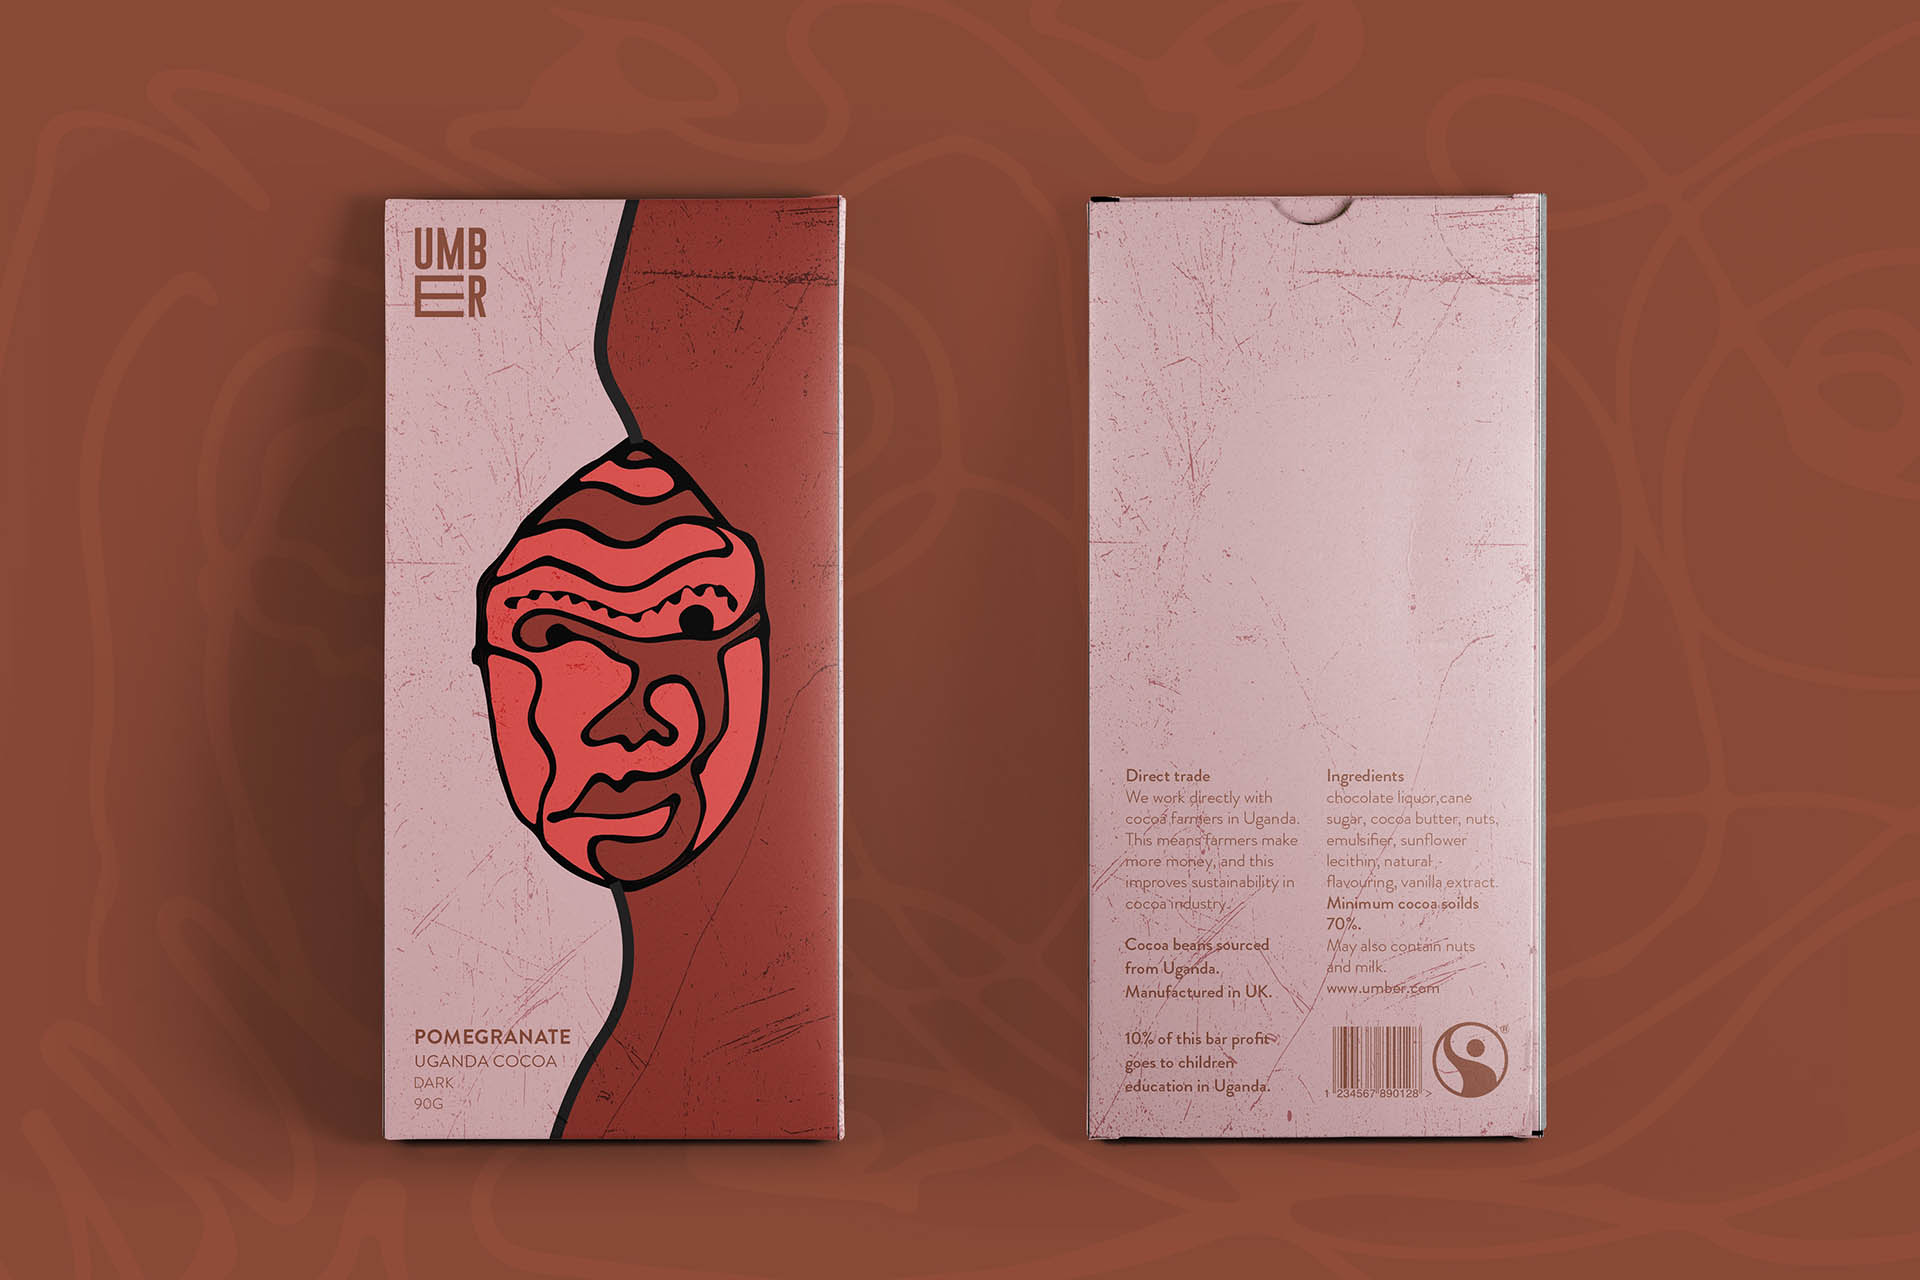 Visual identity and packaging for Umber a chocolate brand working with cocoa farmers to improve their income and sustainability